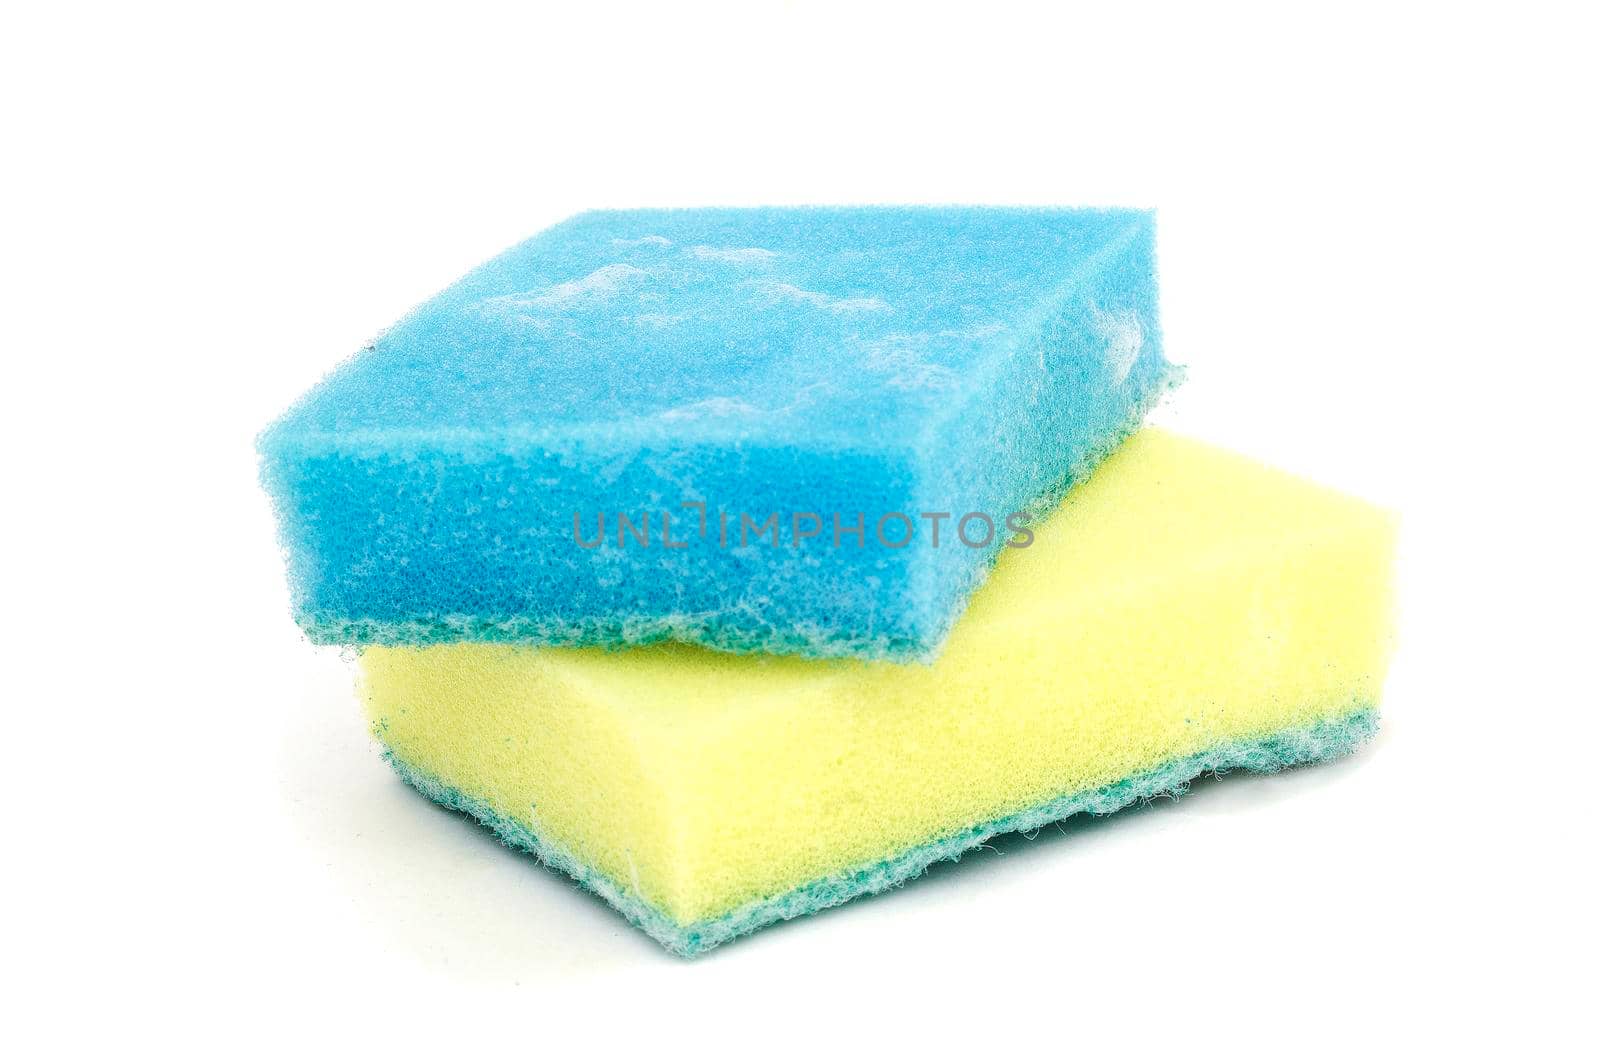 a blue and a yellow sponge isolated on white background. by andre_dechapelle